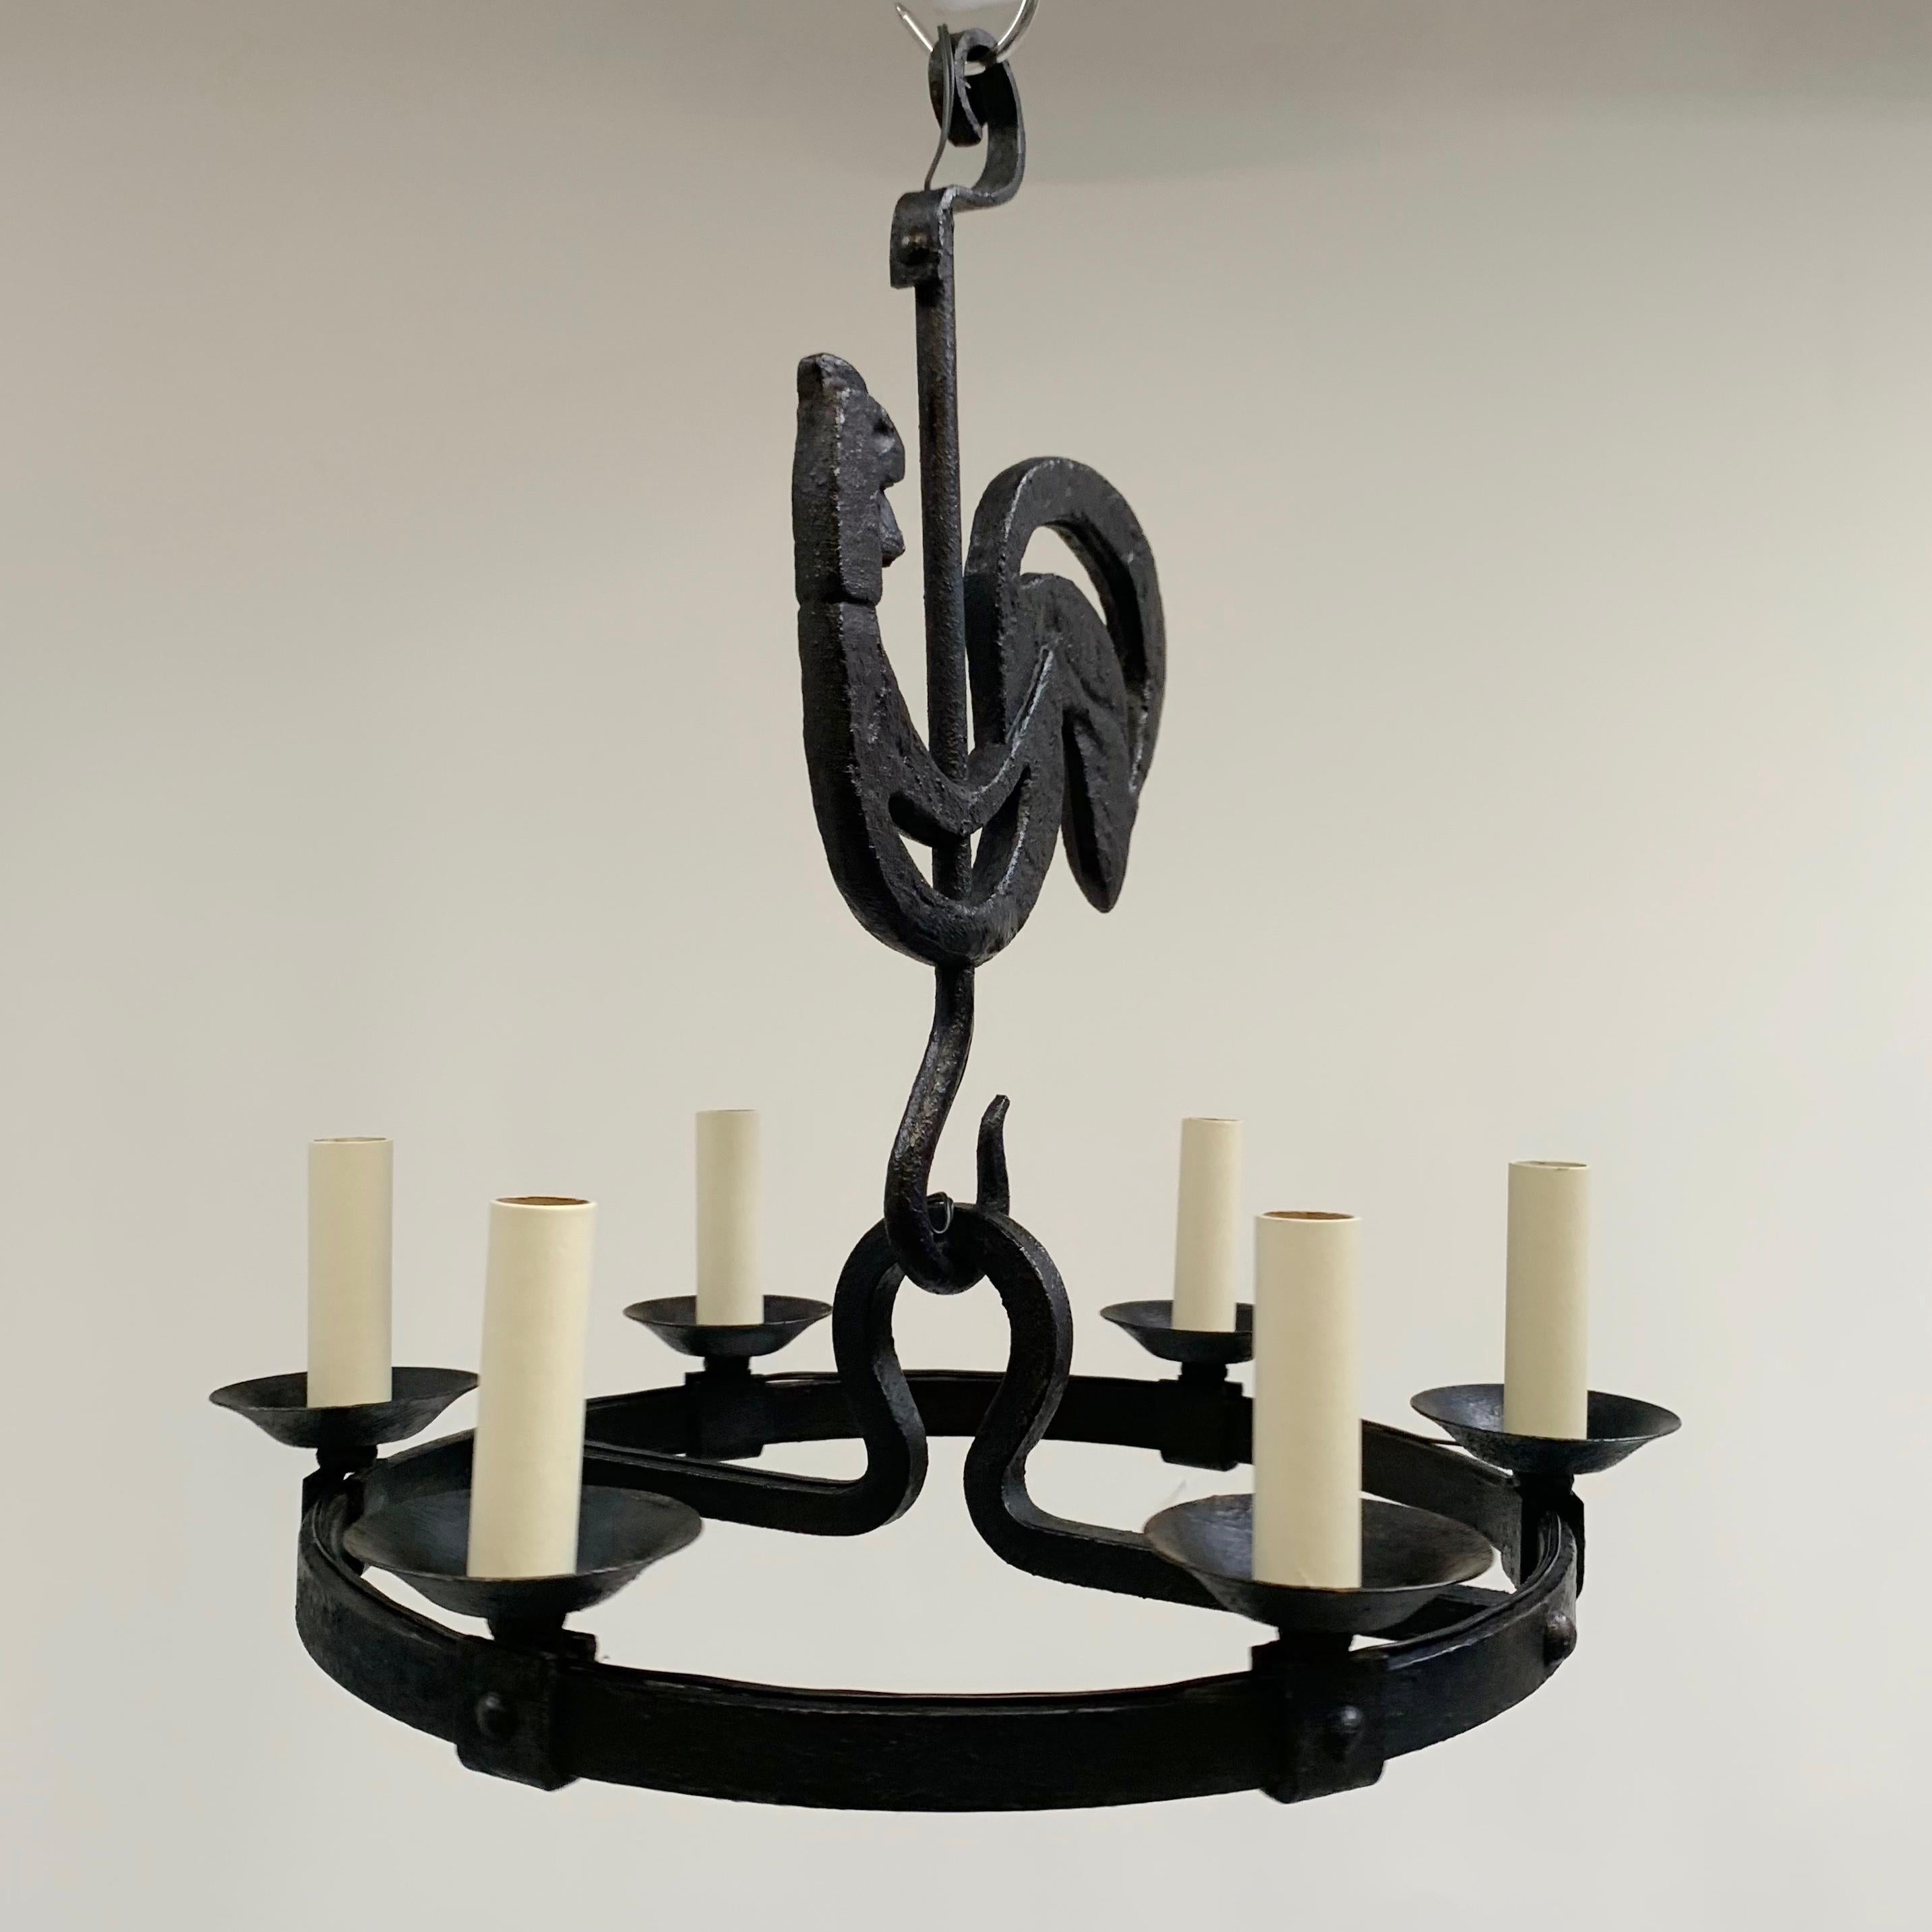 Mid-Century Modern Mid-Century Black Wrought Iron Girouette Chandelier, France circa 1950. For Sale